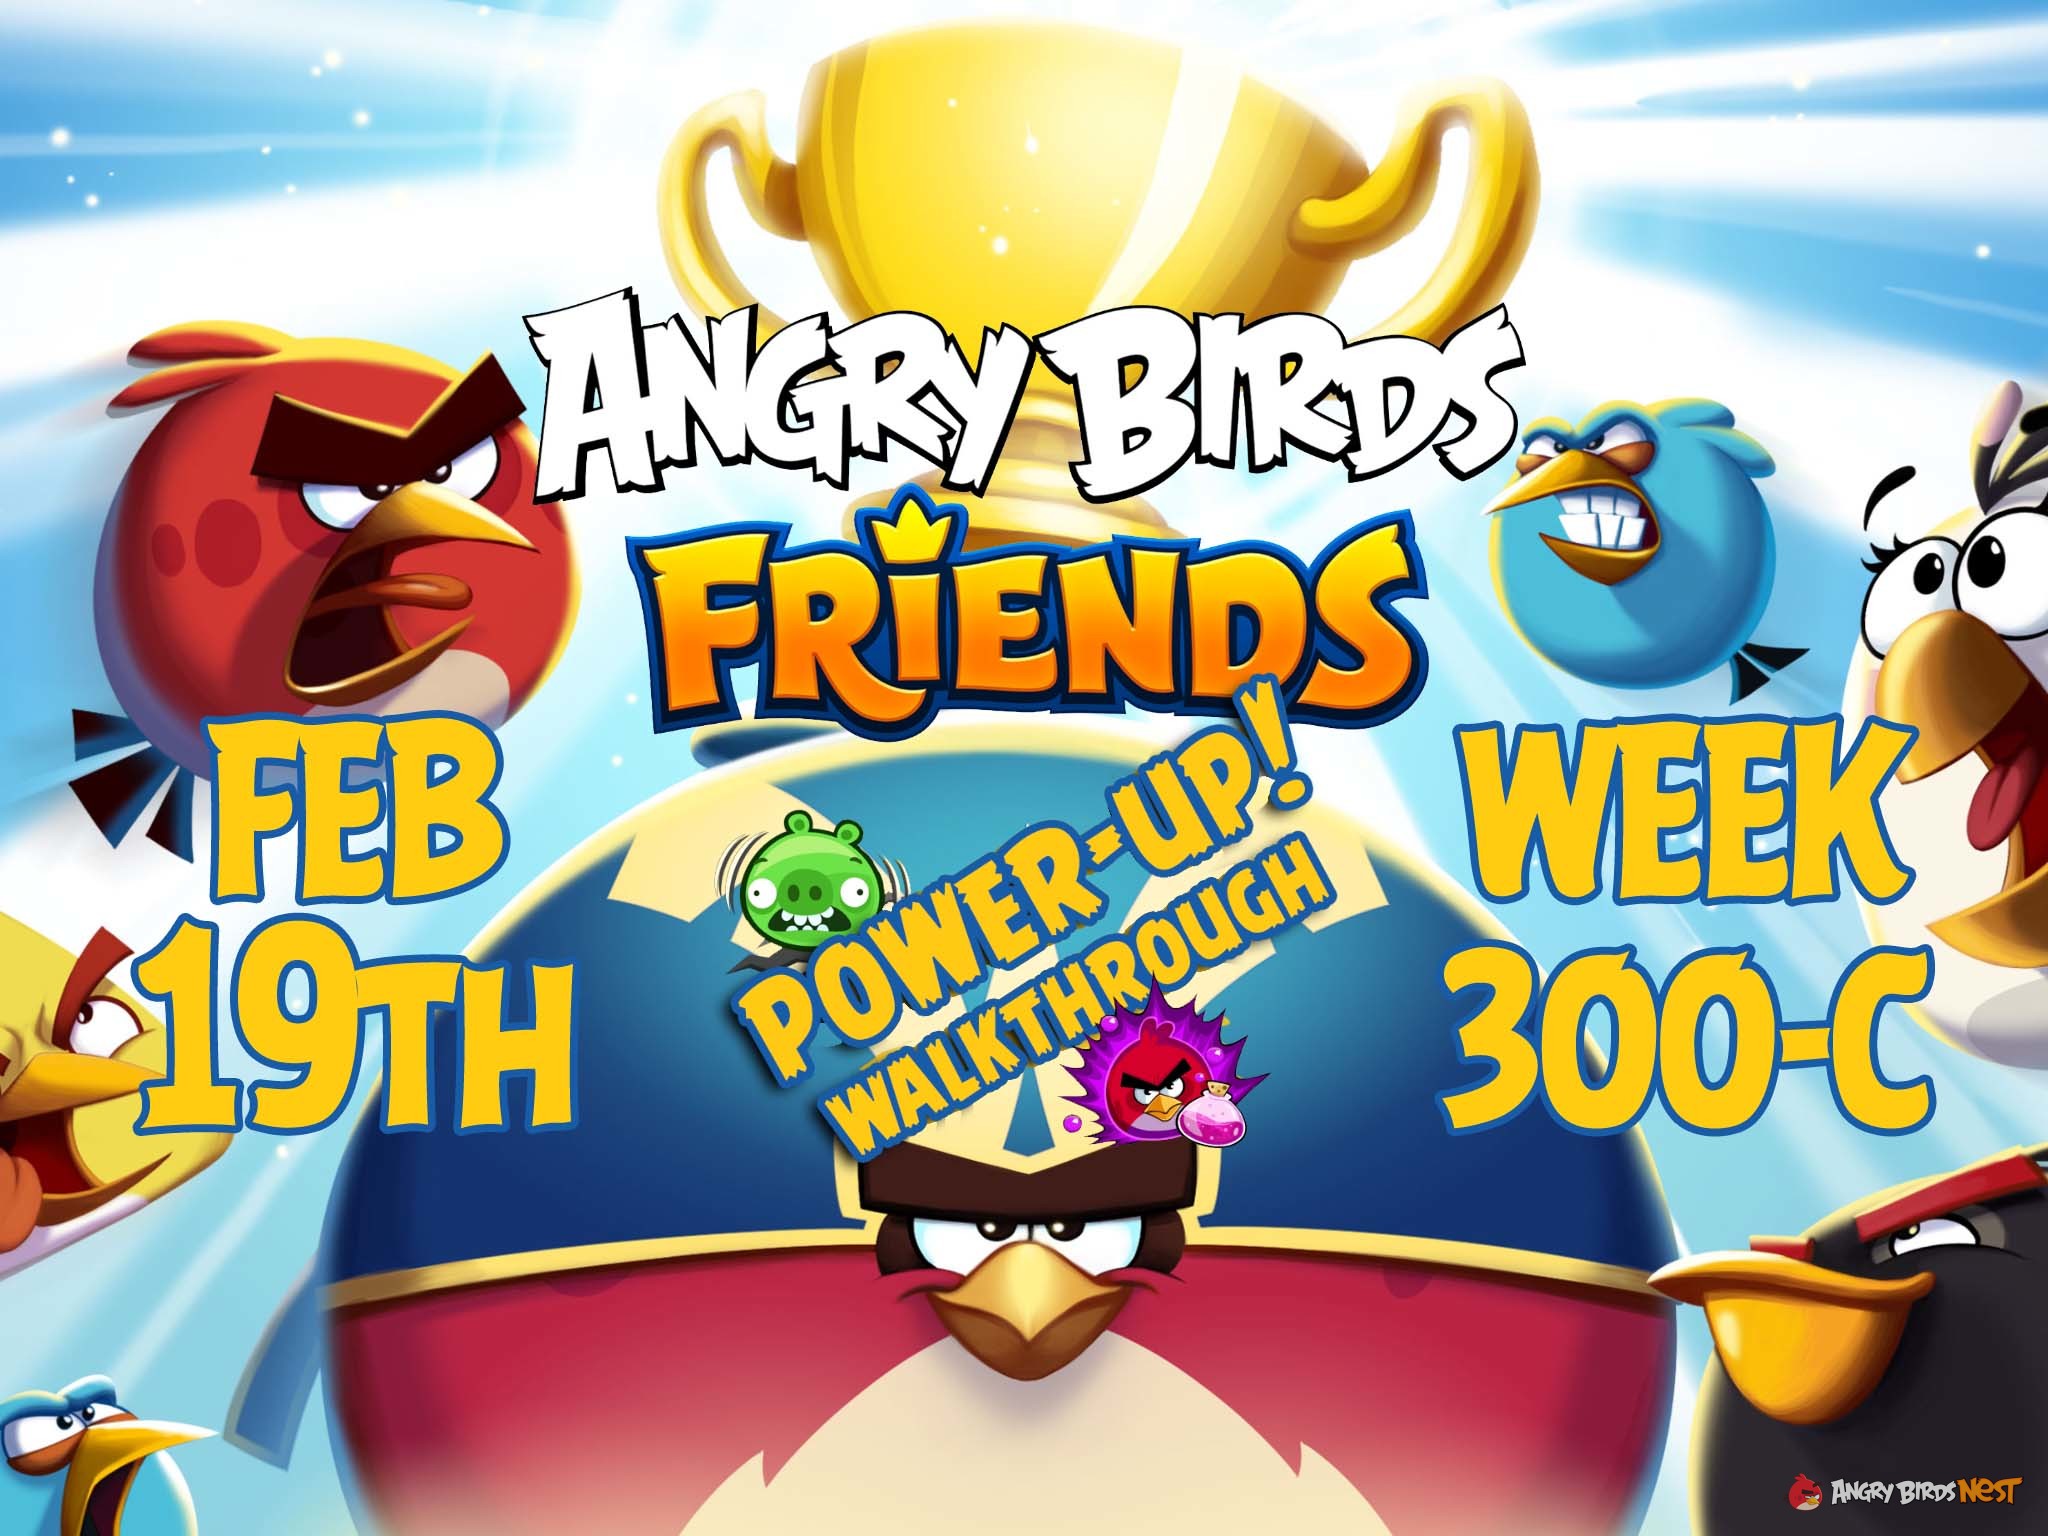 Angry Birds Friends Tournament Week 300-C Feature Image PU